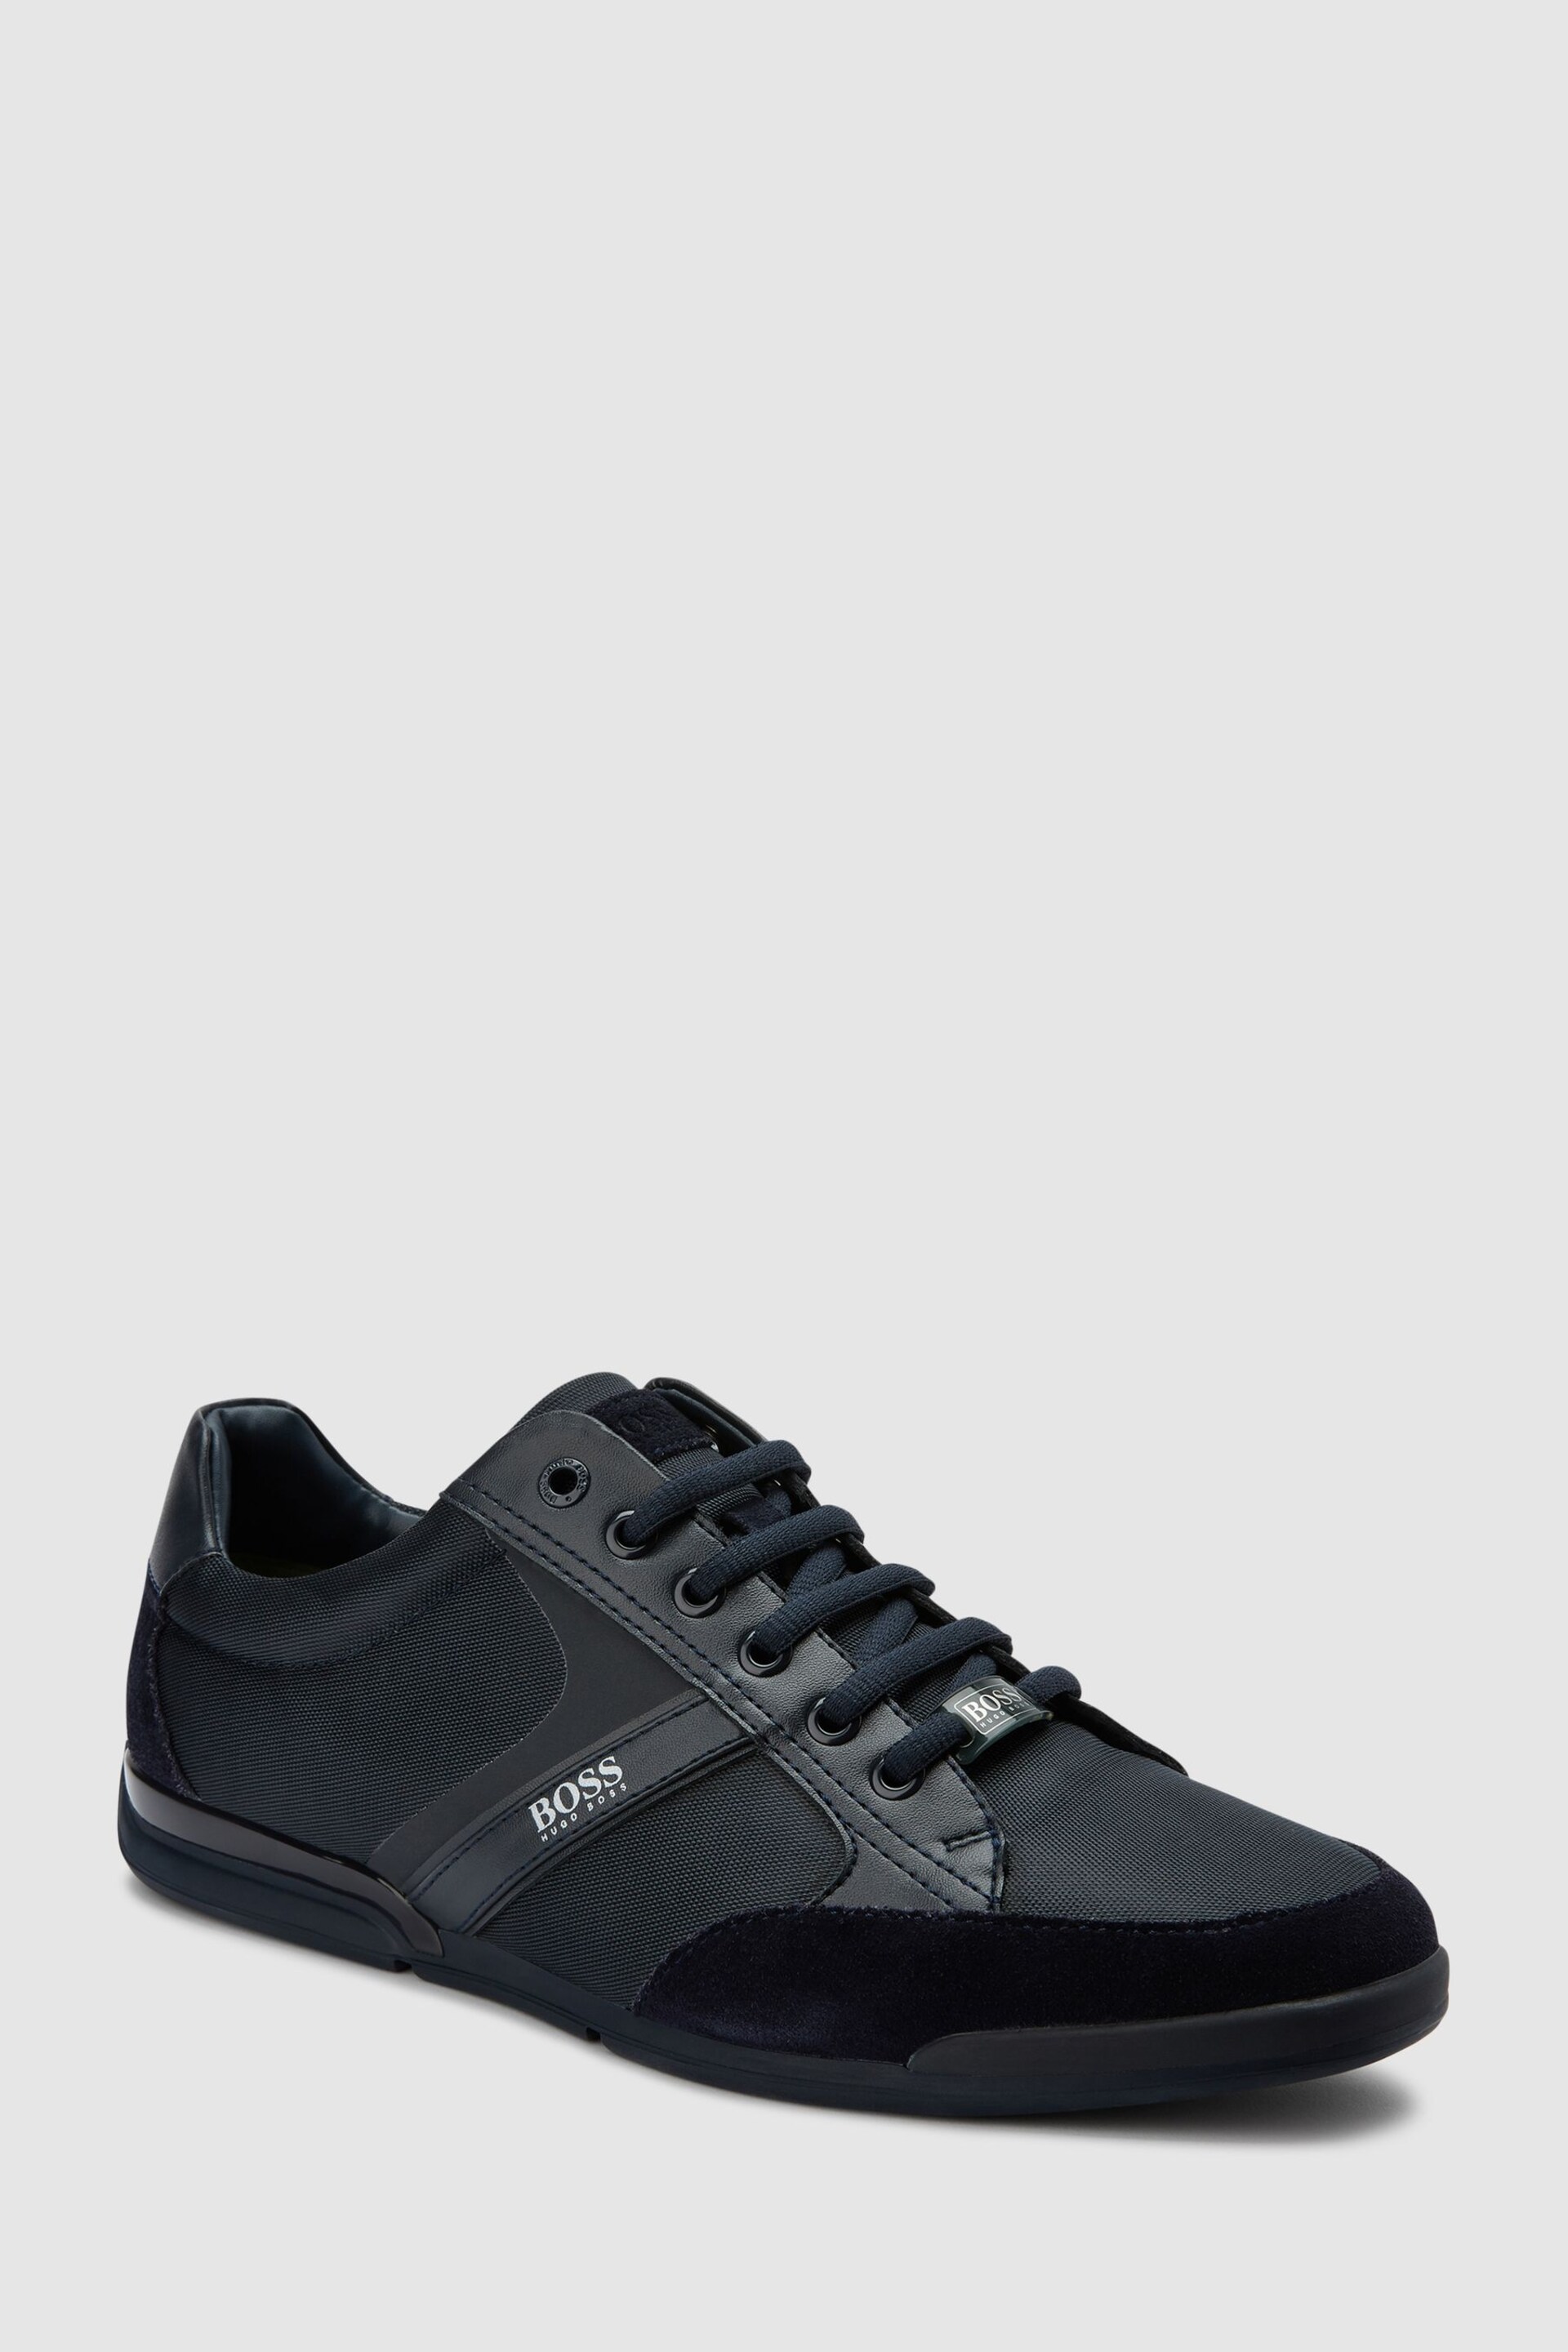 BOSS Navy Saturn Trainers - Image 2 of 4